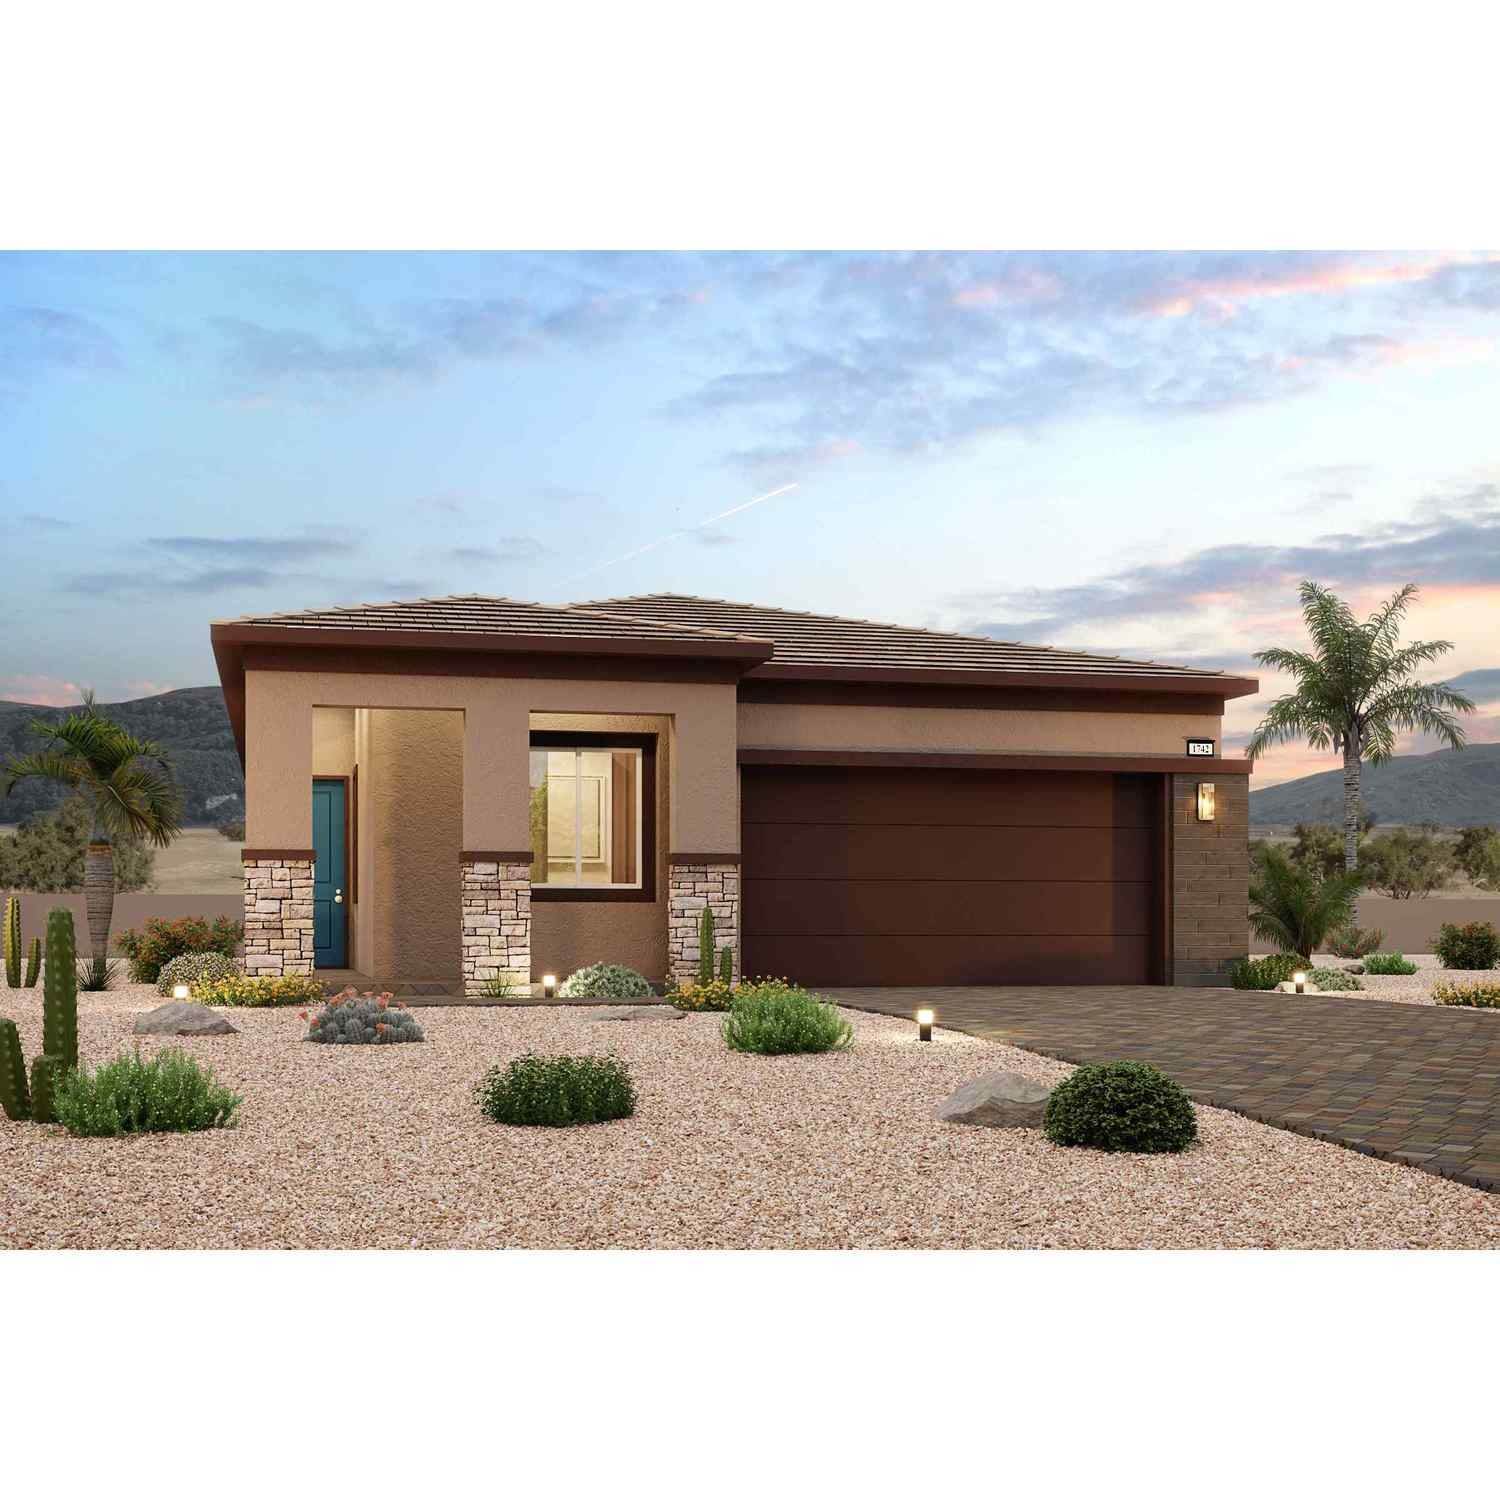 Single Family for Sale at Henderson, NV 89011